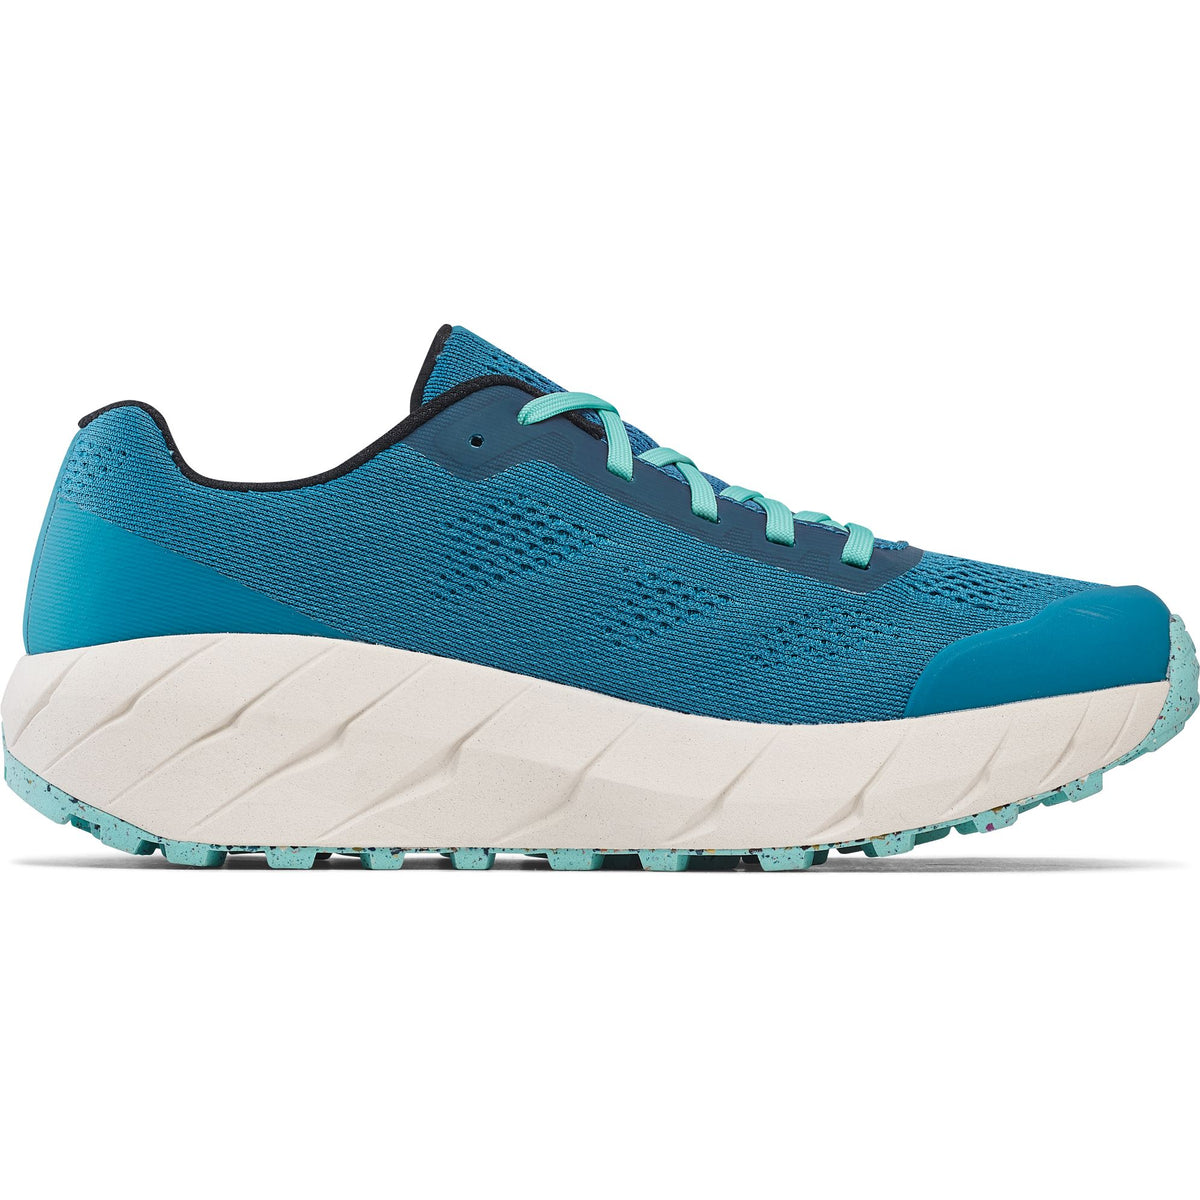 ICEBUG ARCUS RB9X WOMEN'S | TRAIL AND ROAD RUNNING | DANFORM SHOES ...